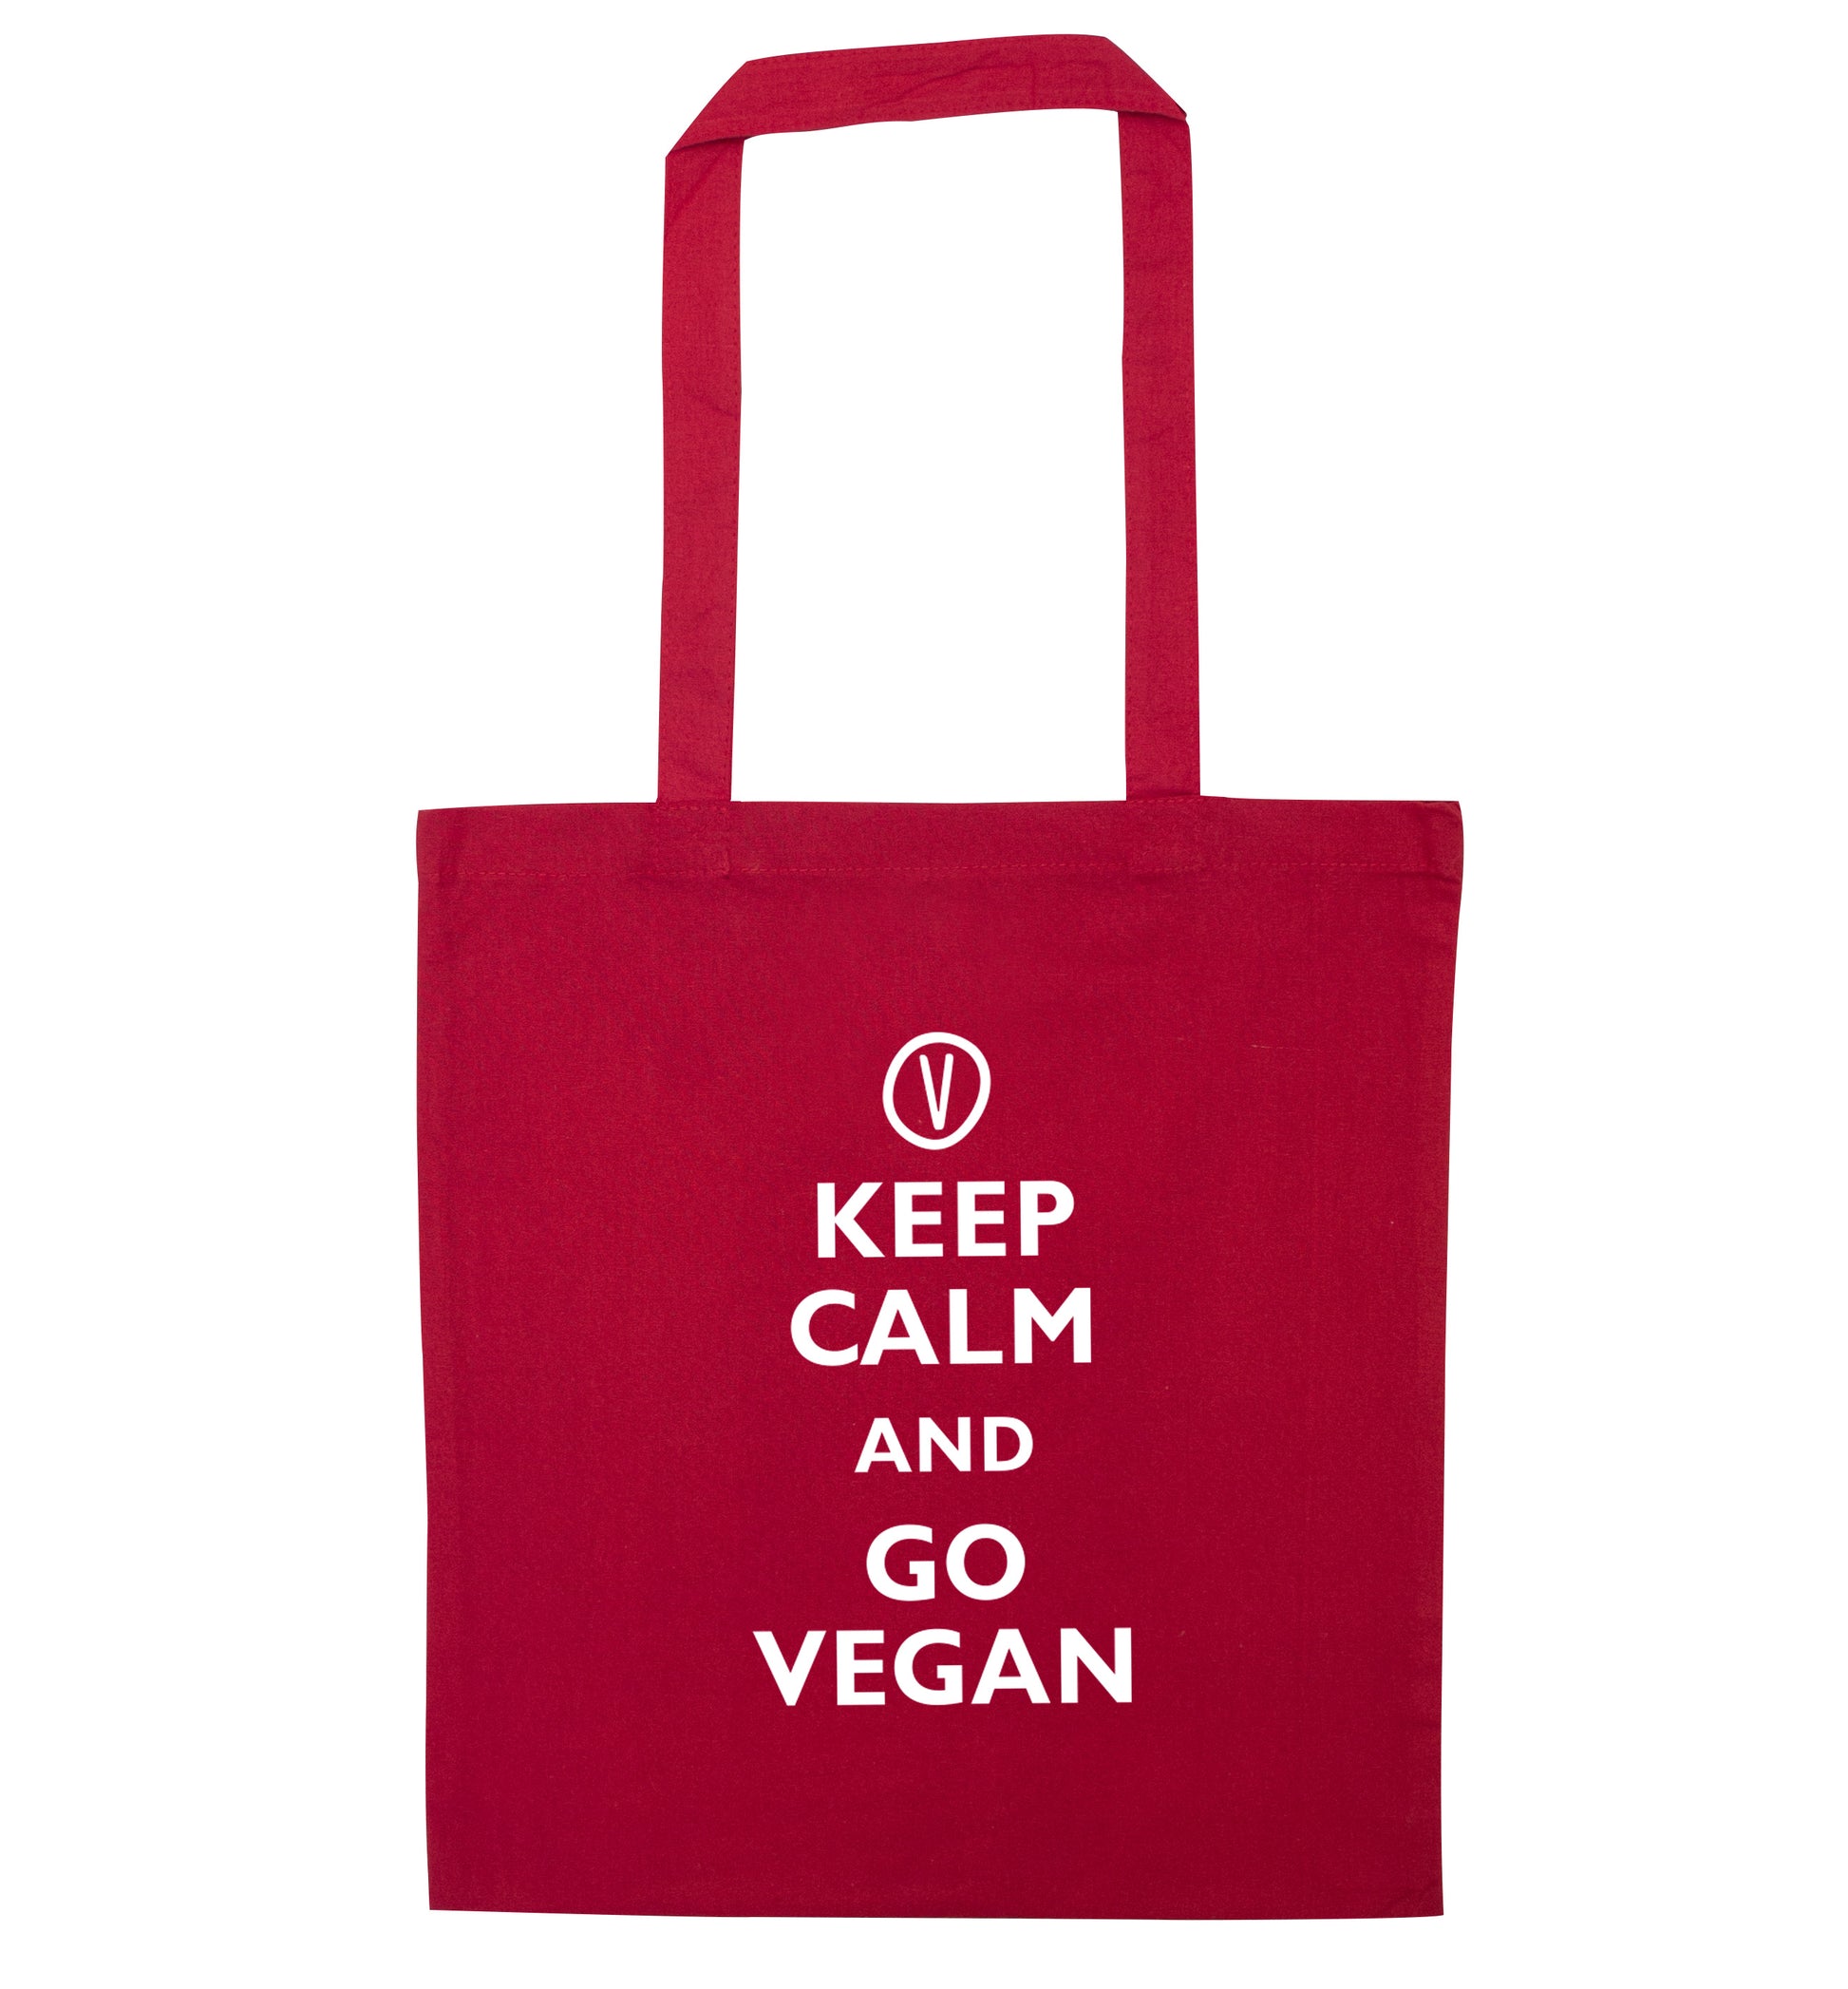 Keep calm and go vegan red tote bag